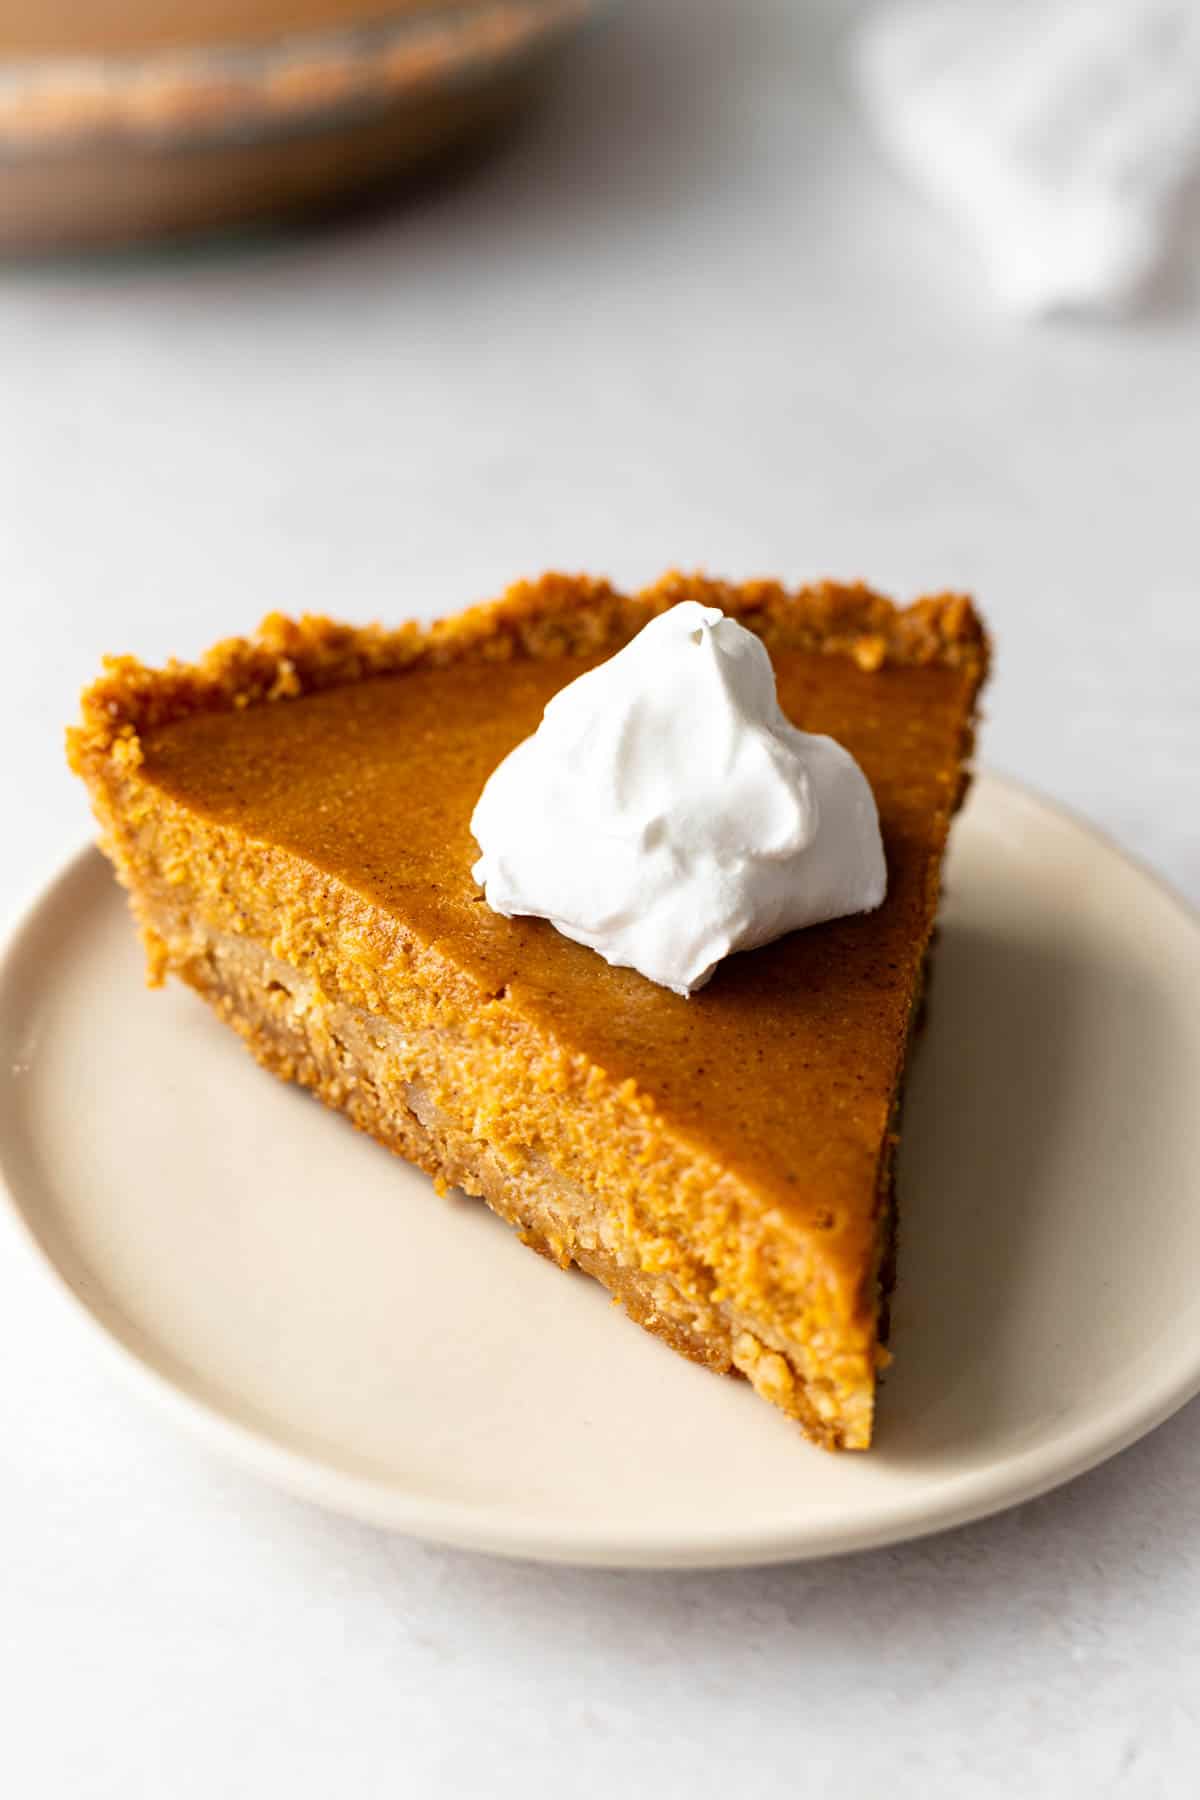 slice of pumpkin pie on a graham cracker crust topped with whipped topping. Full pie is in the background.